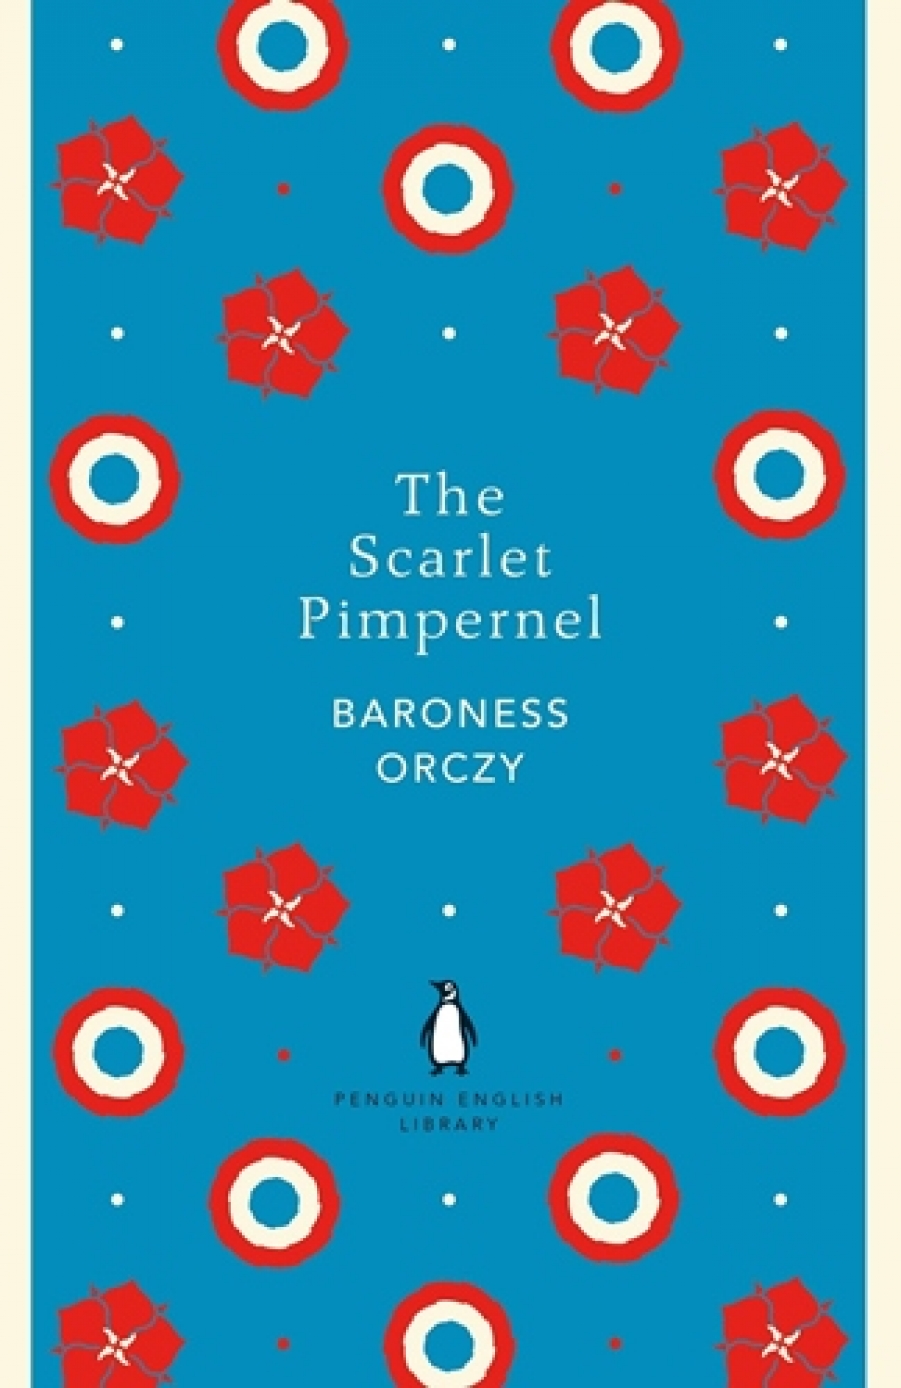 Orczy, Baroness Scarlet Pimpernel, the 